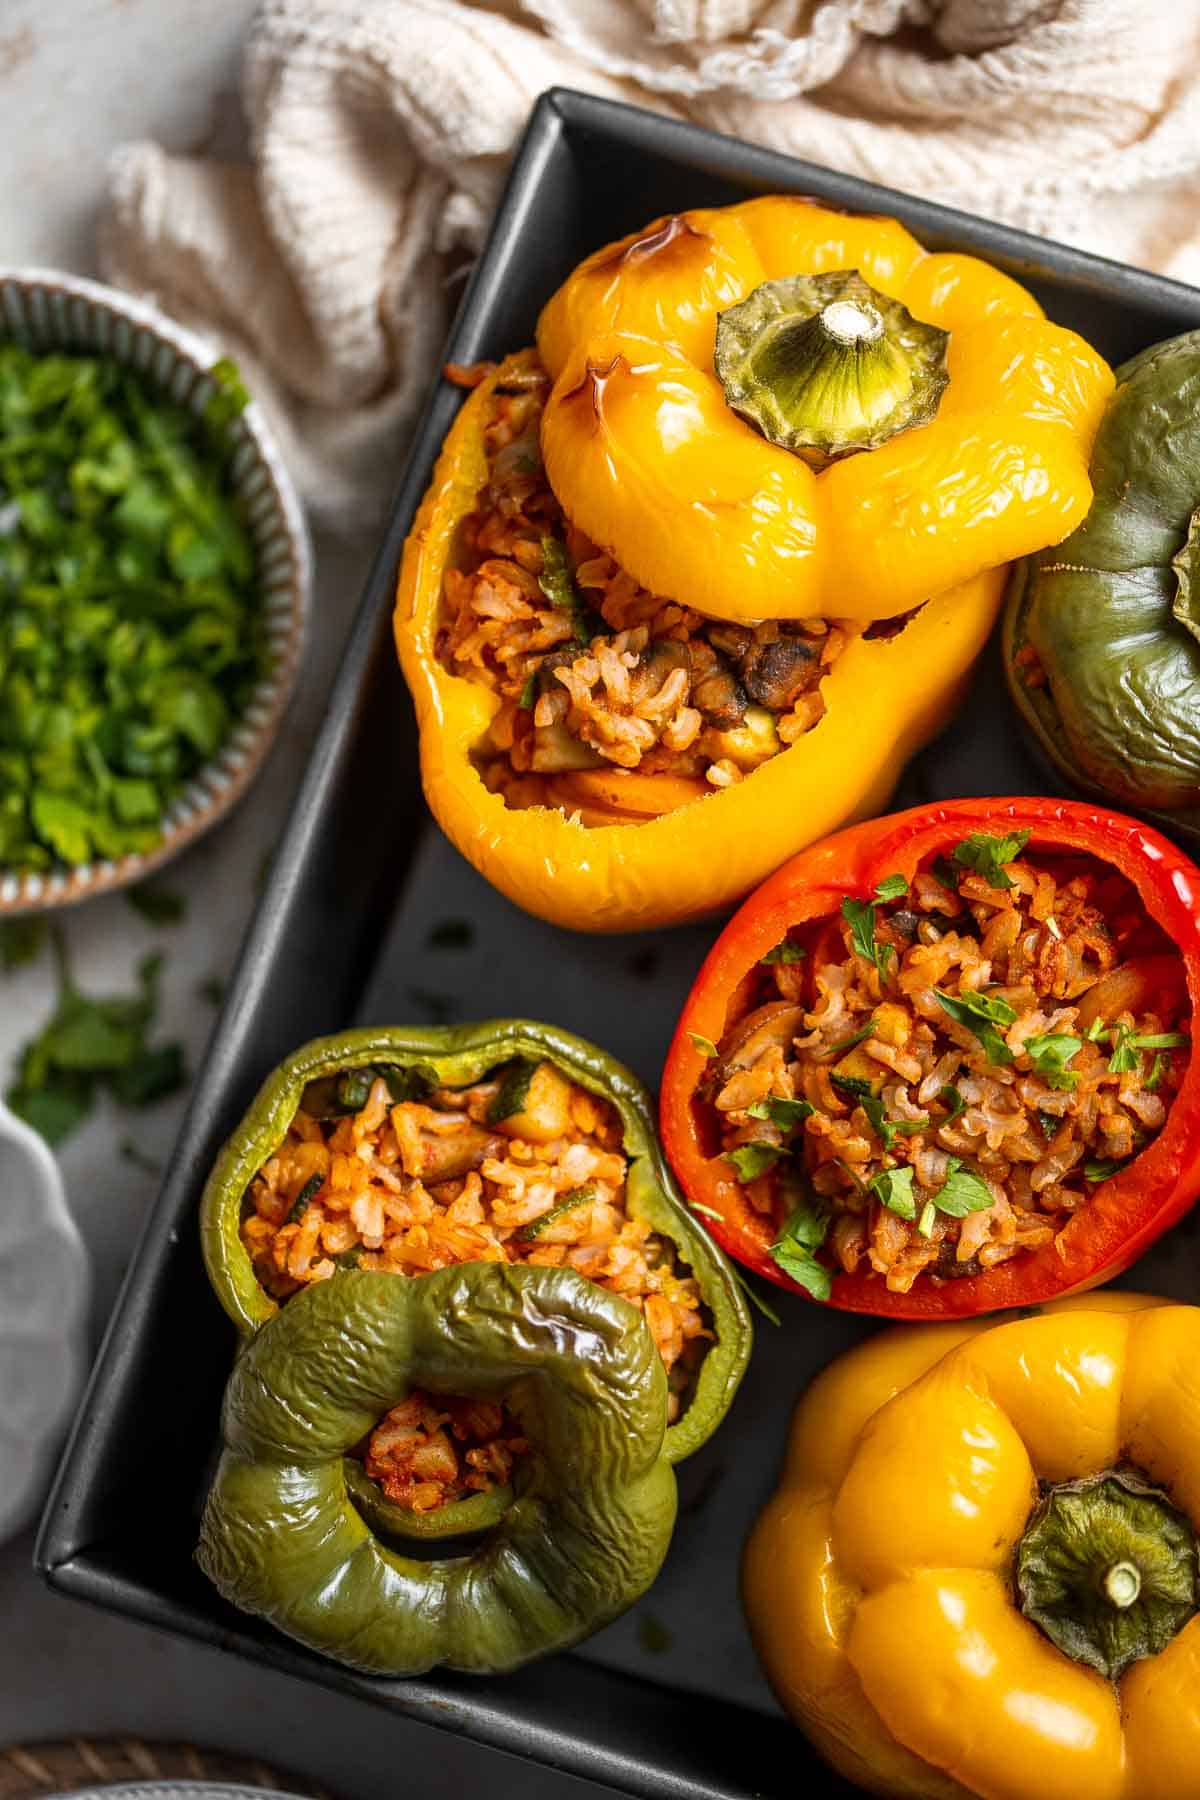 Vegan Stuffed Peppers are stuffed with pan-fried mushrooms, tender rice, and veggies, making them flavorful and filling. Easy to make in under an hour! | aheadofthyme.com